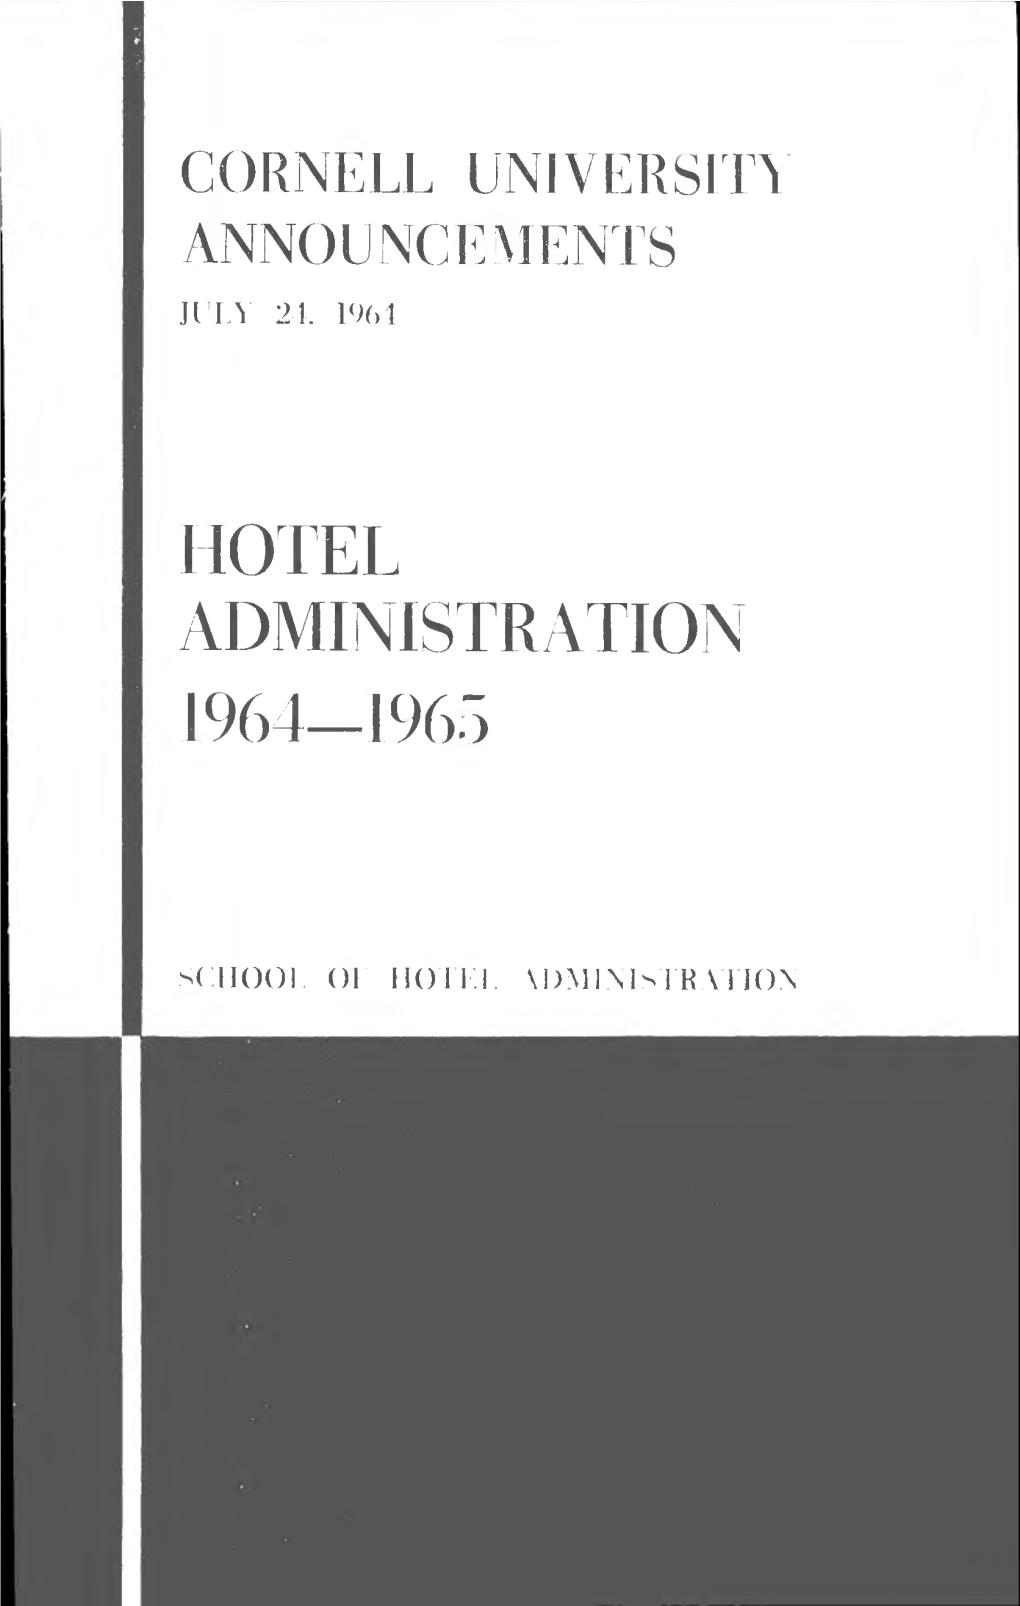 Hotel Administration 1964-1965